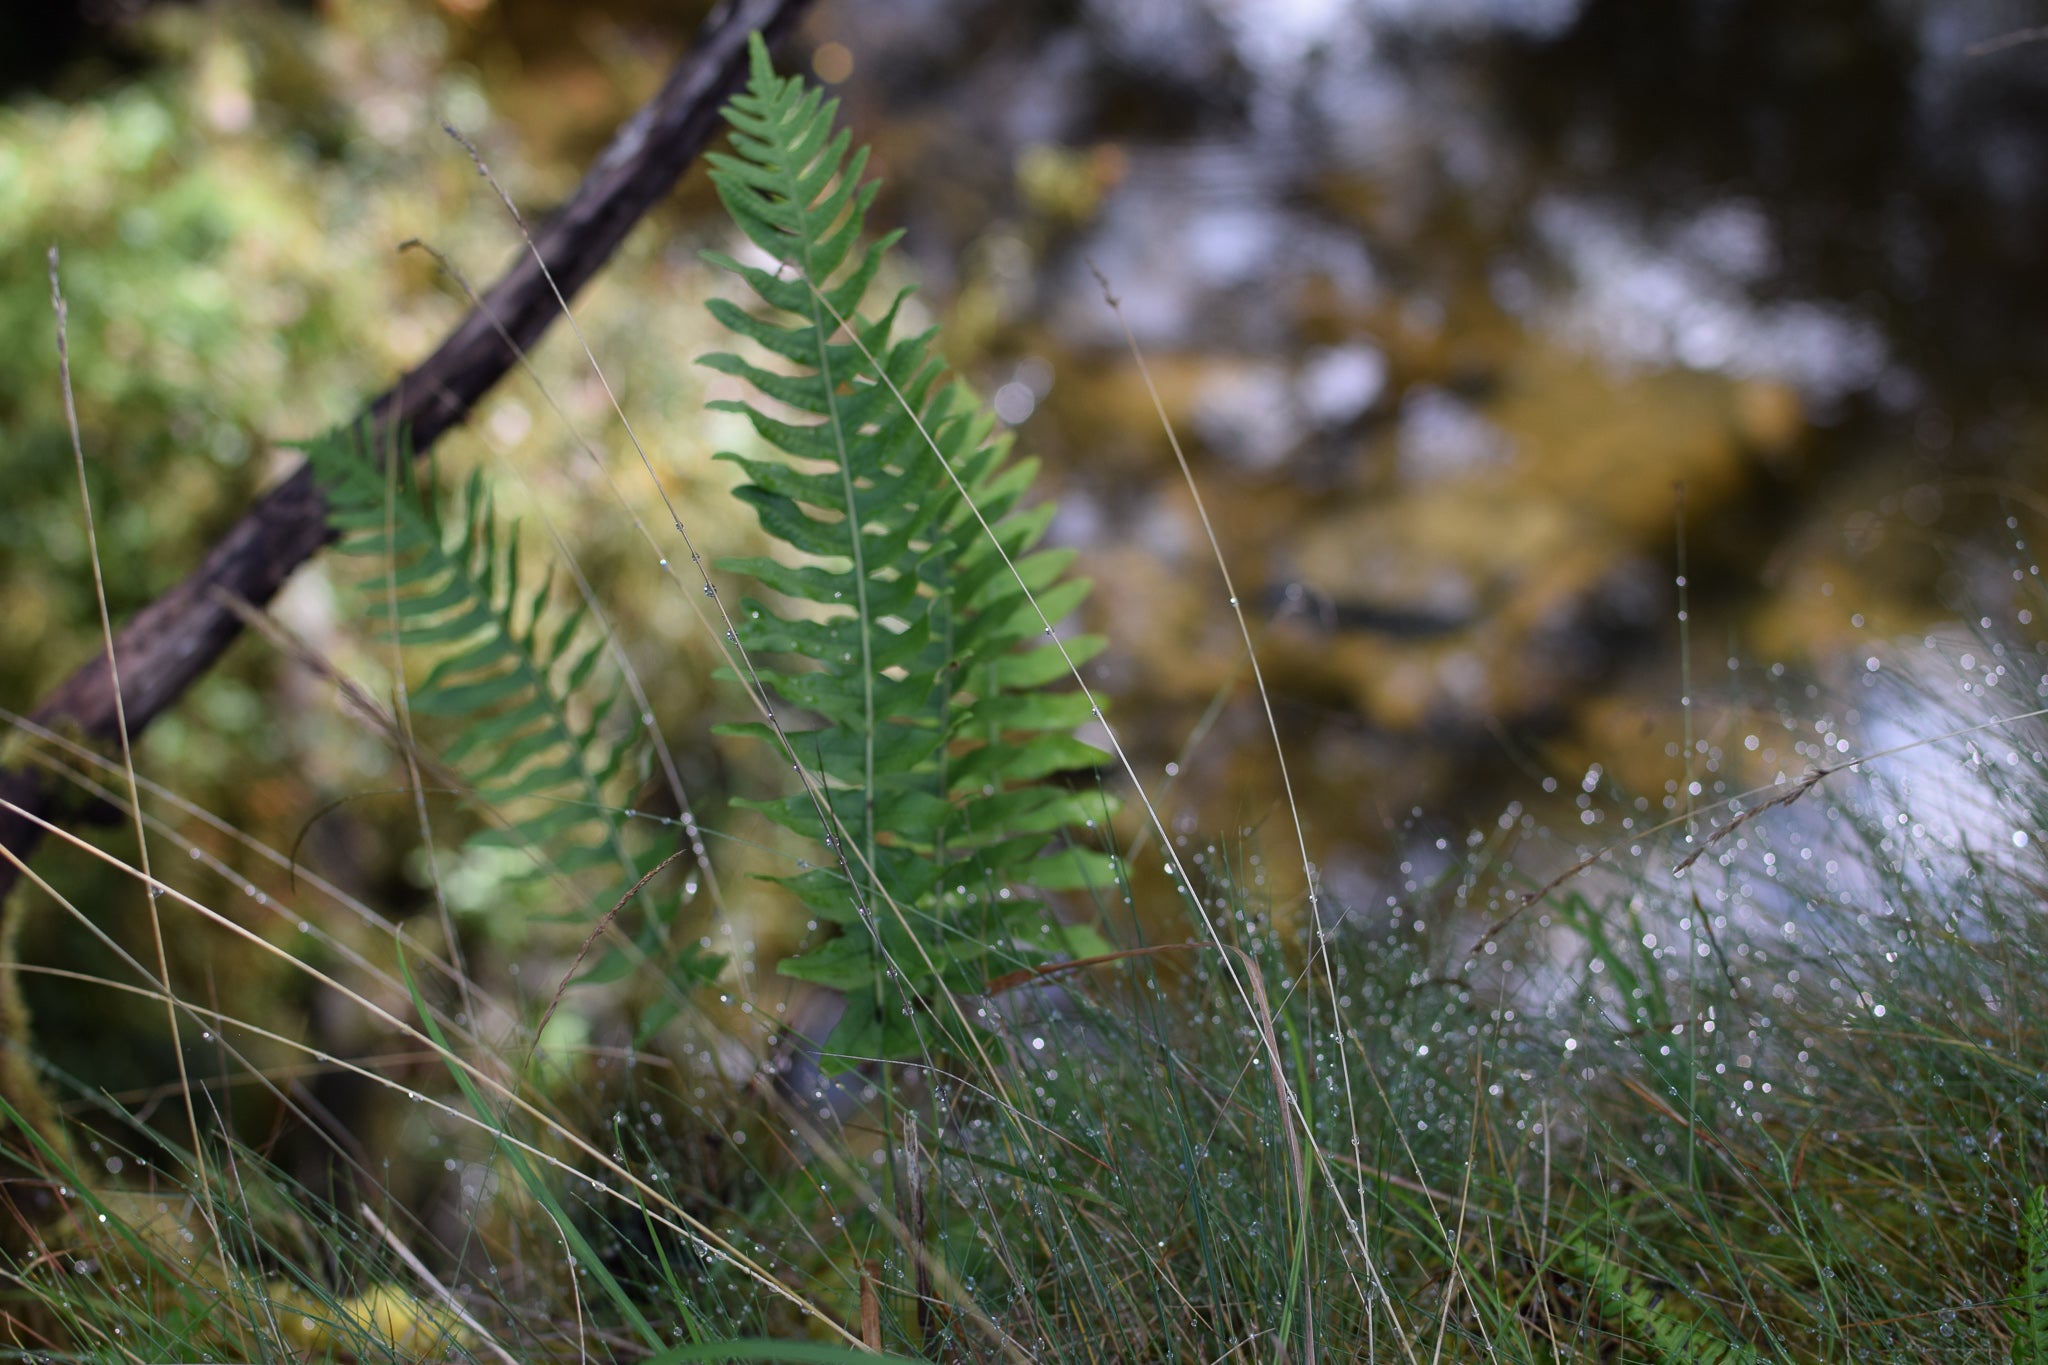 dewy grass and ferns by the river